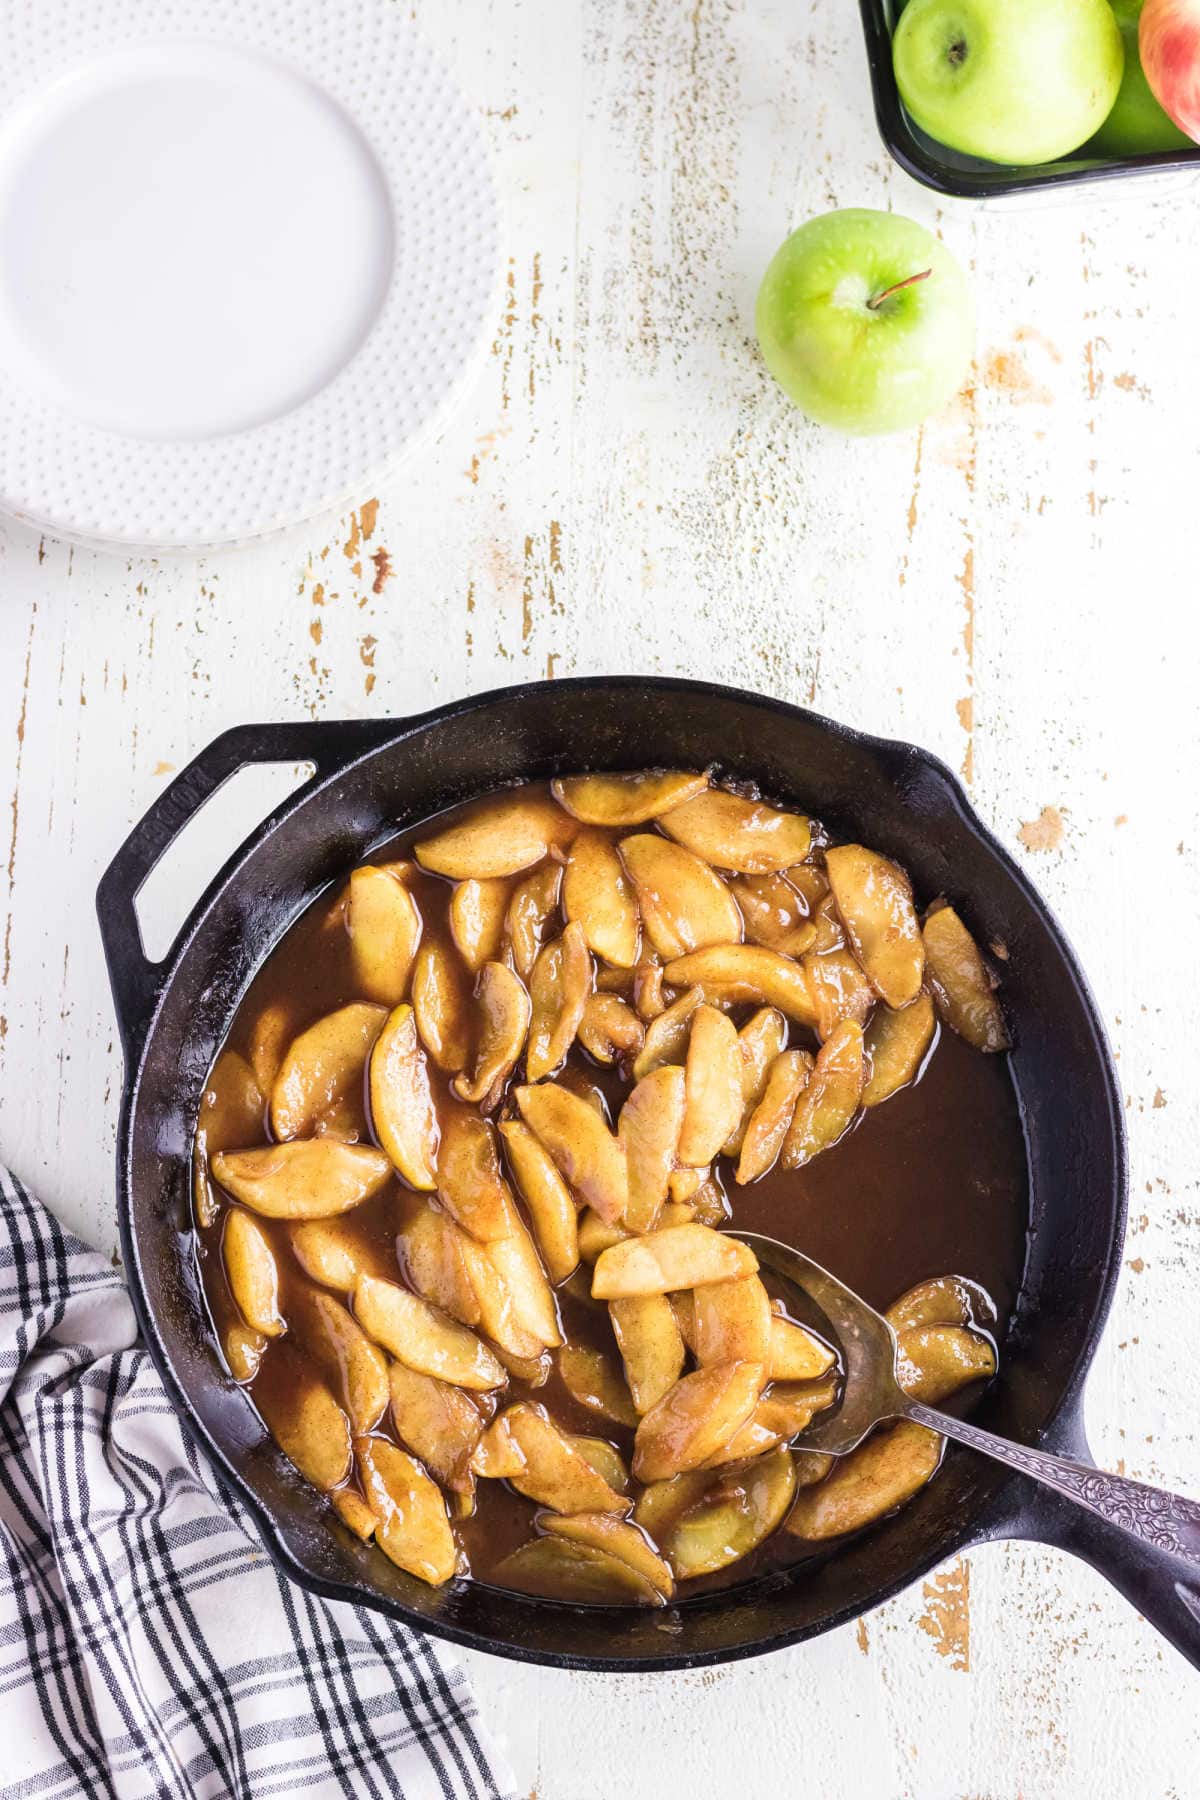 Overhead view of fried apples in a skillet.